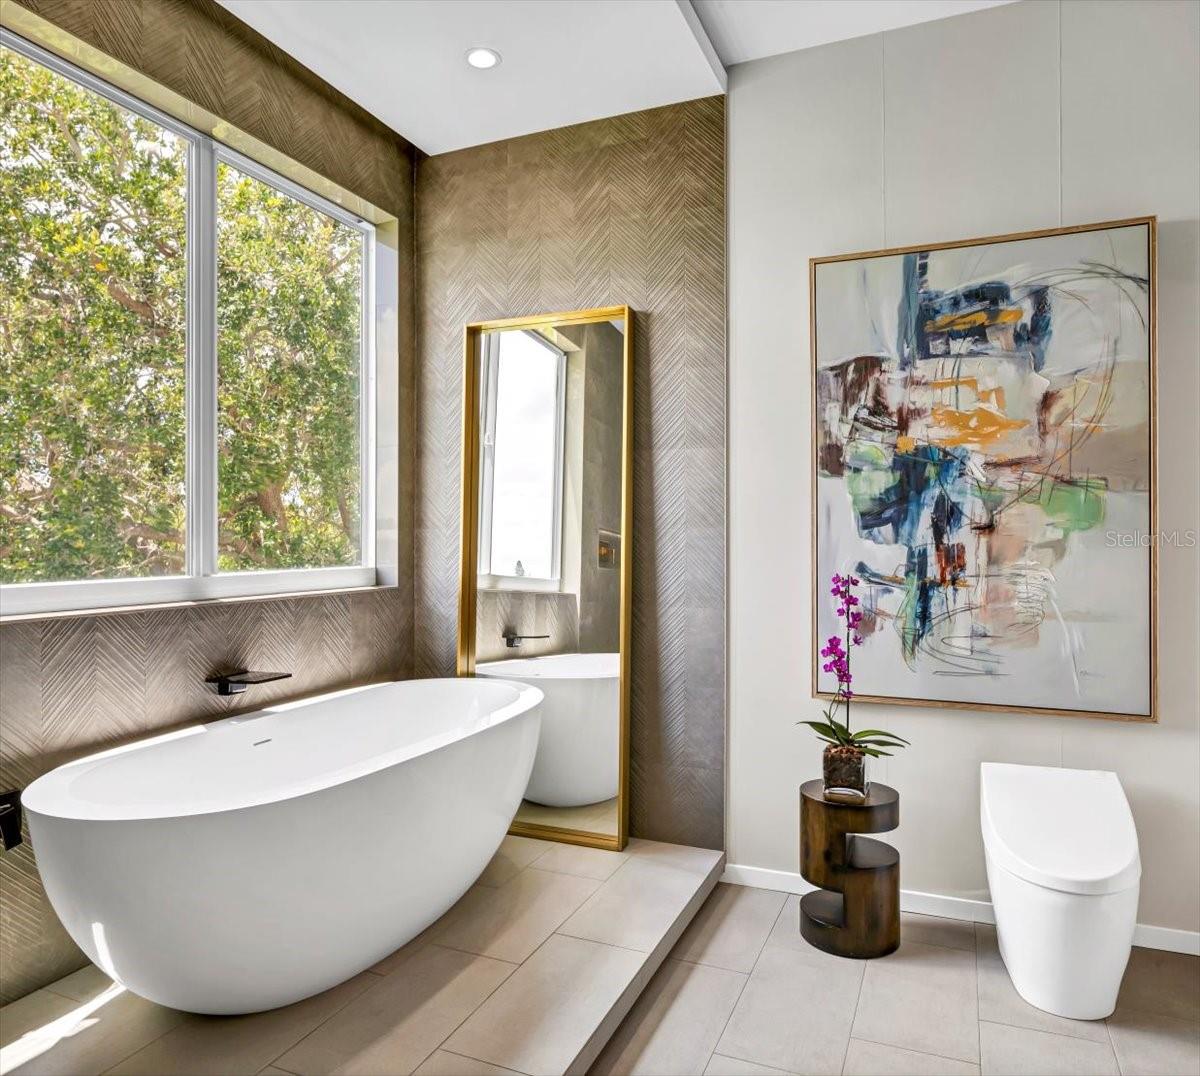 Pamper yourself in the marvelous oval soaking tub, resting upon a dedicated platform.